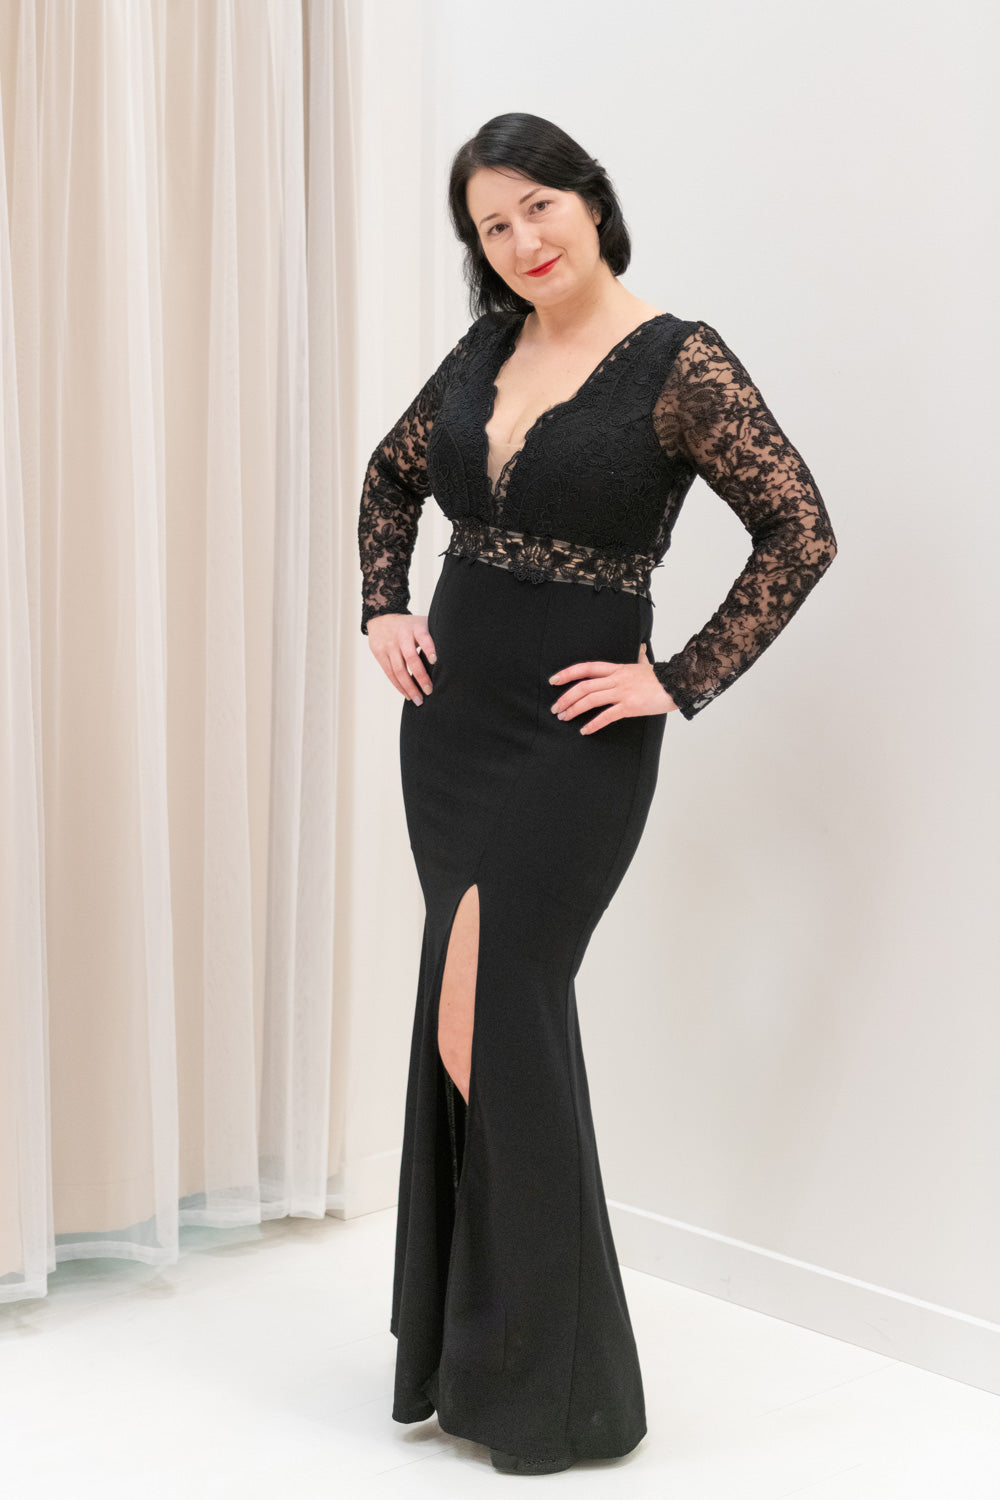 Lace-Bodice-Open-Back-Long-Sleeve-Black-and-Nude-Evening-Dress